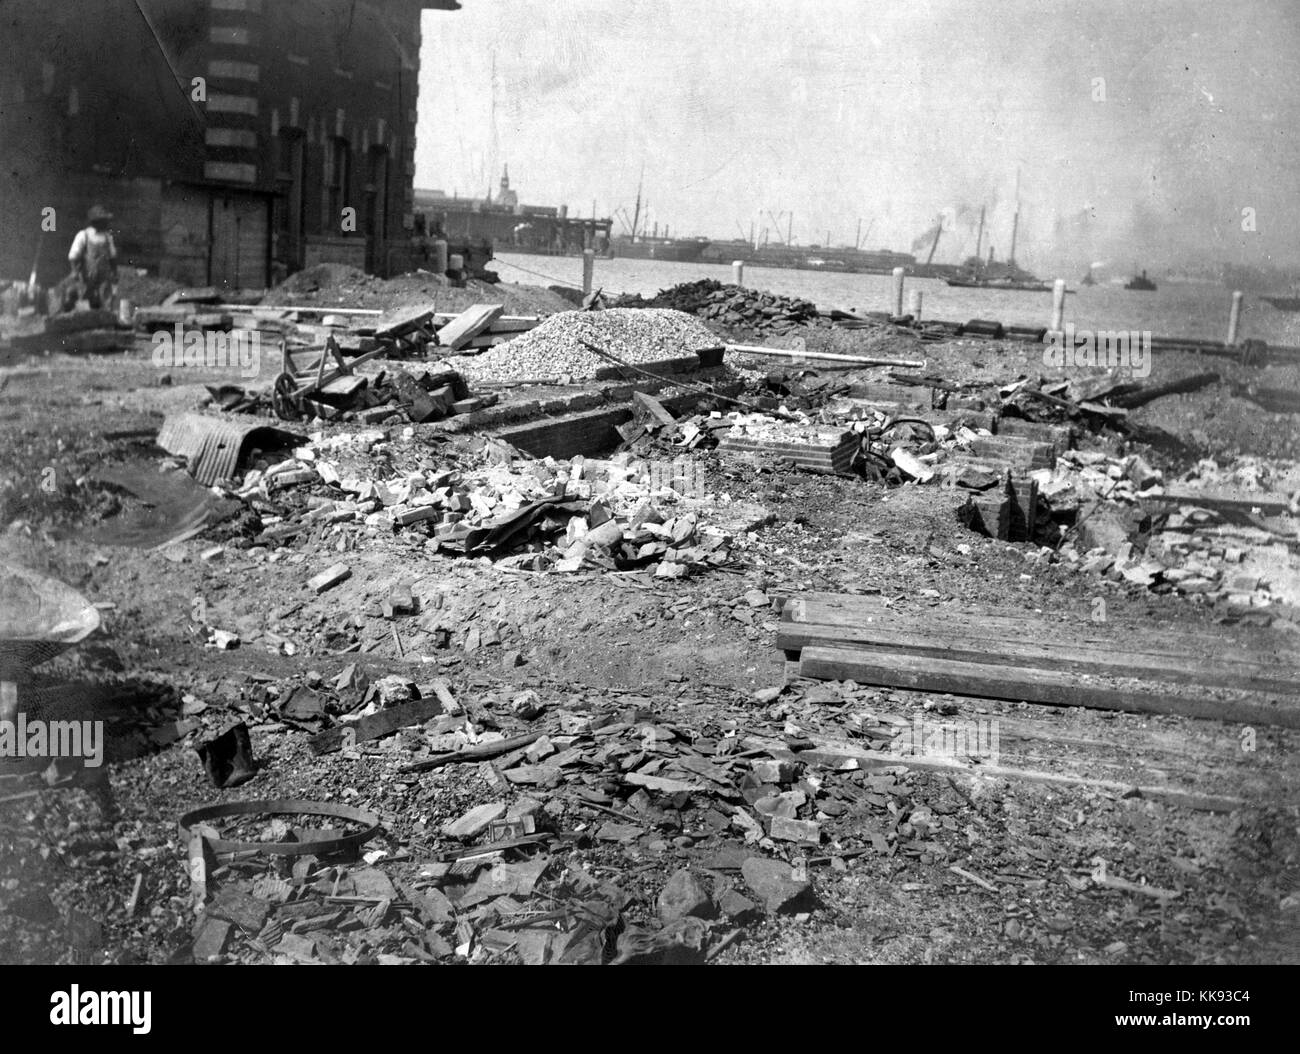 A view of construction materials and rubble laying on the ground outside of one of the buildings on Ellis Island, Ellis Island was the busiest point of immigration in the United States from 1892 until it closed in 1954 after processing over 12 million immigrants, New York, 1907. From the New York Public Library. Stock Photo